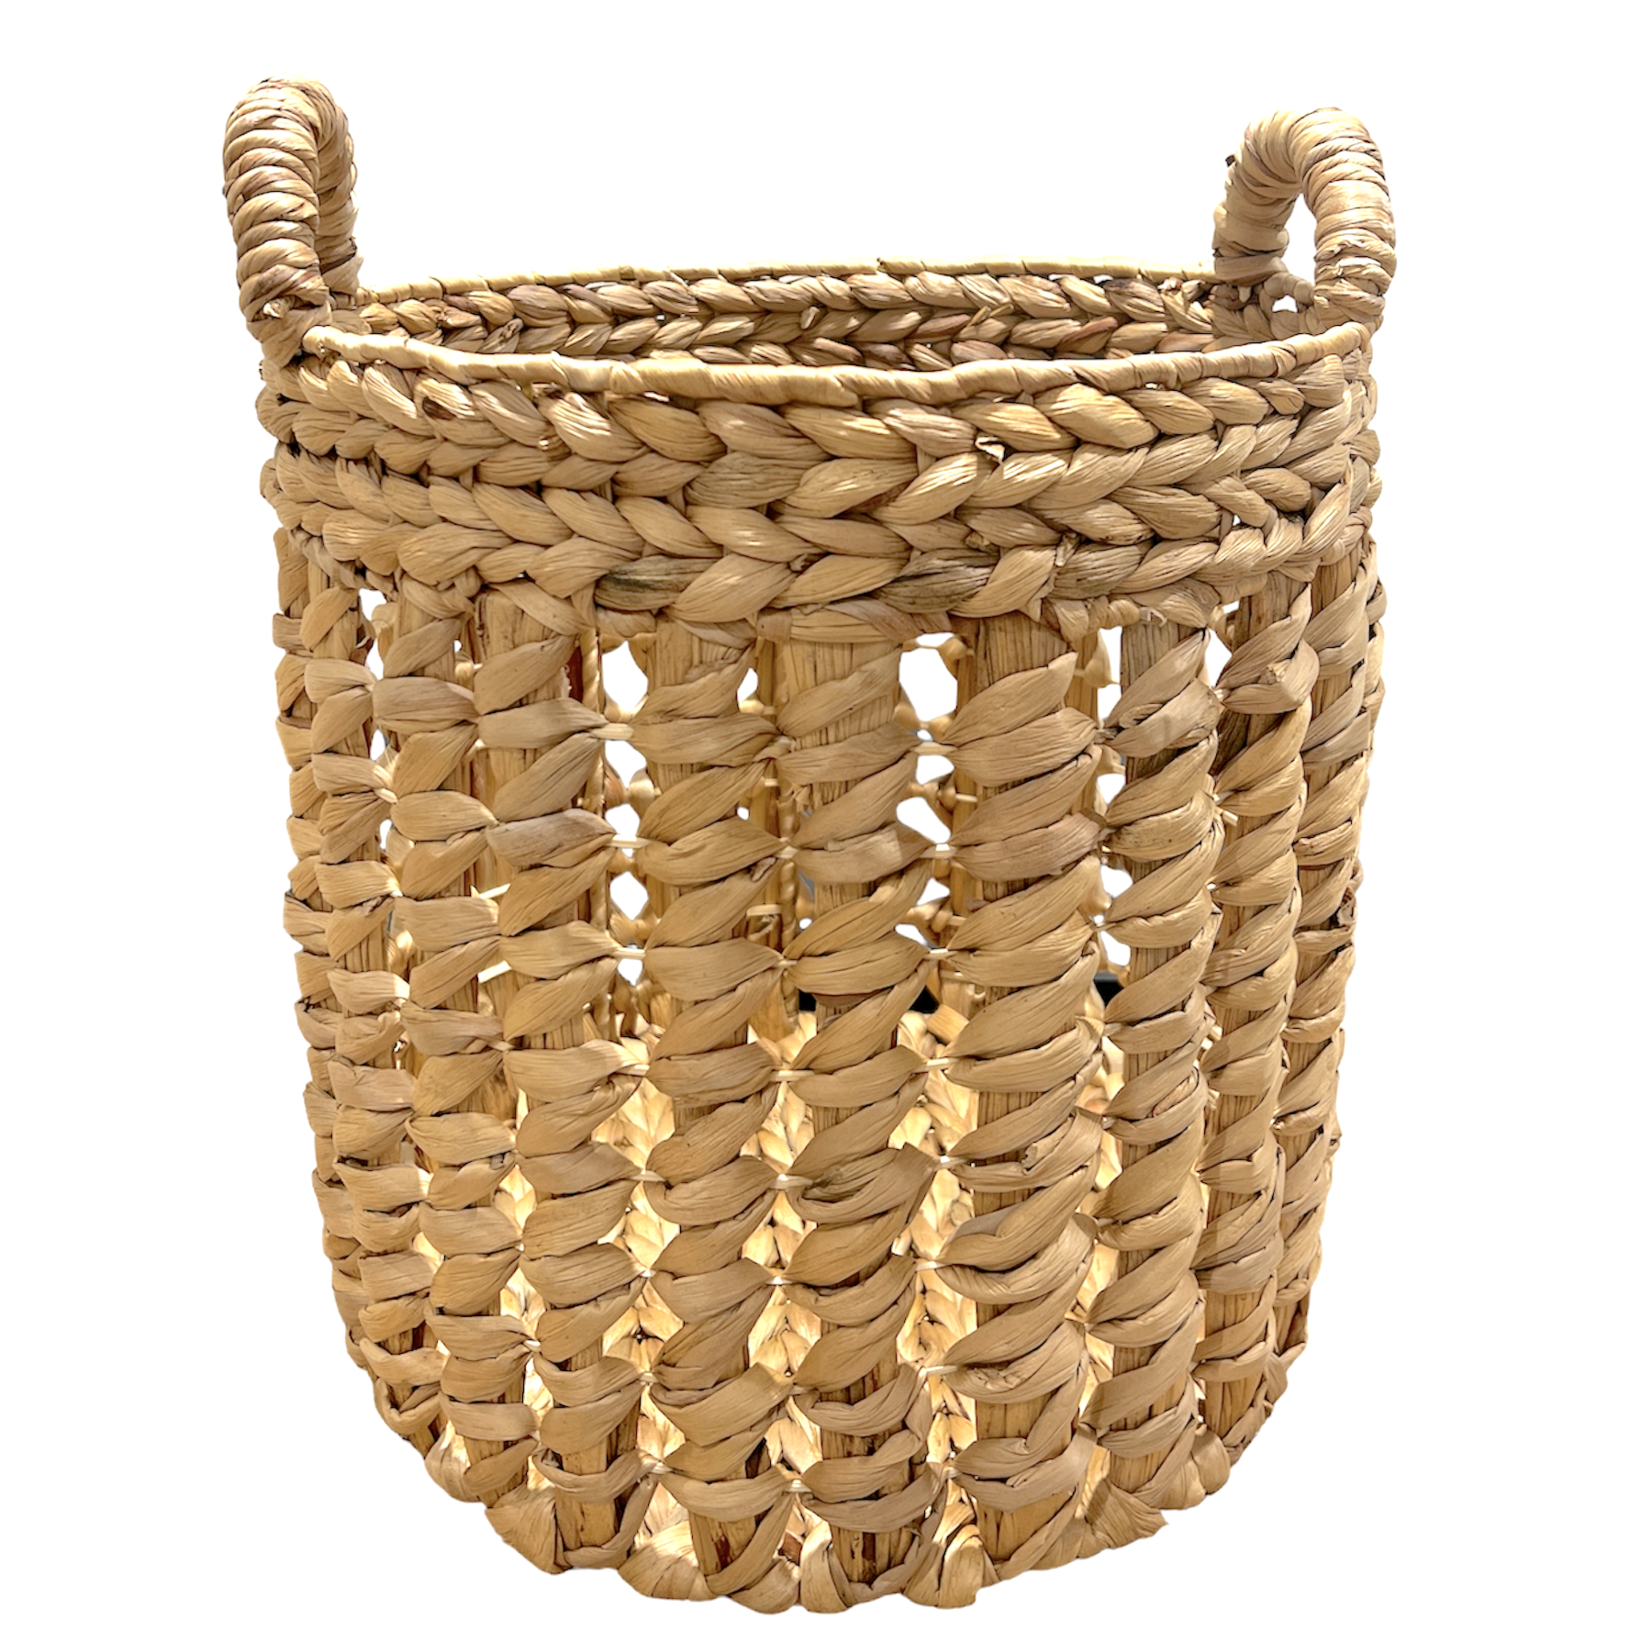 Outside The Box 20" Water Hyacinth Basket With Handles